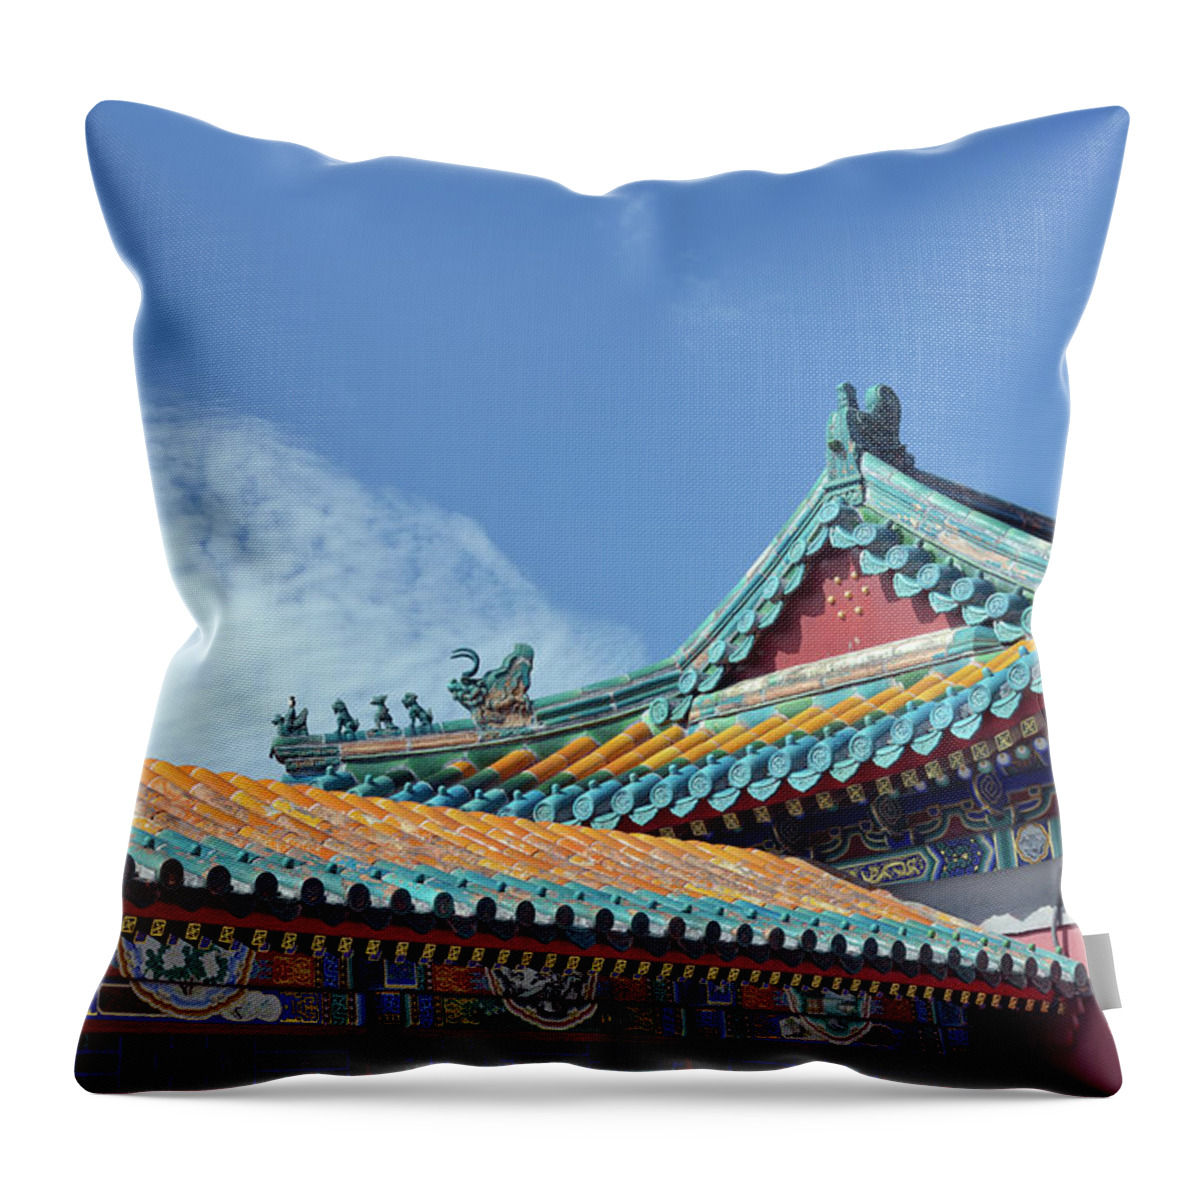 Chinese Culture Throw Pillow featuring the photograph Architecture In Summer Palace by Aimin Tang